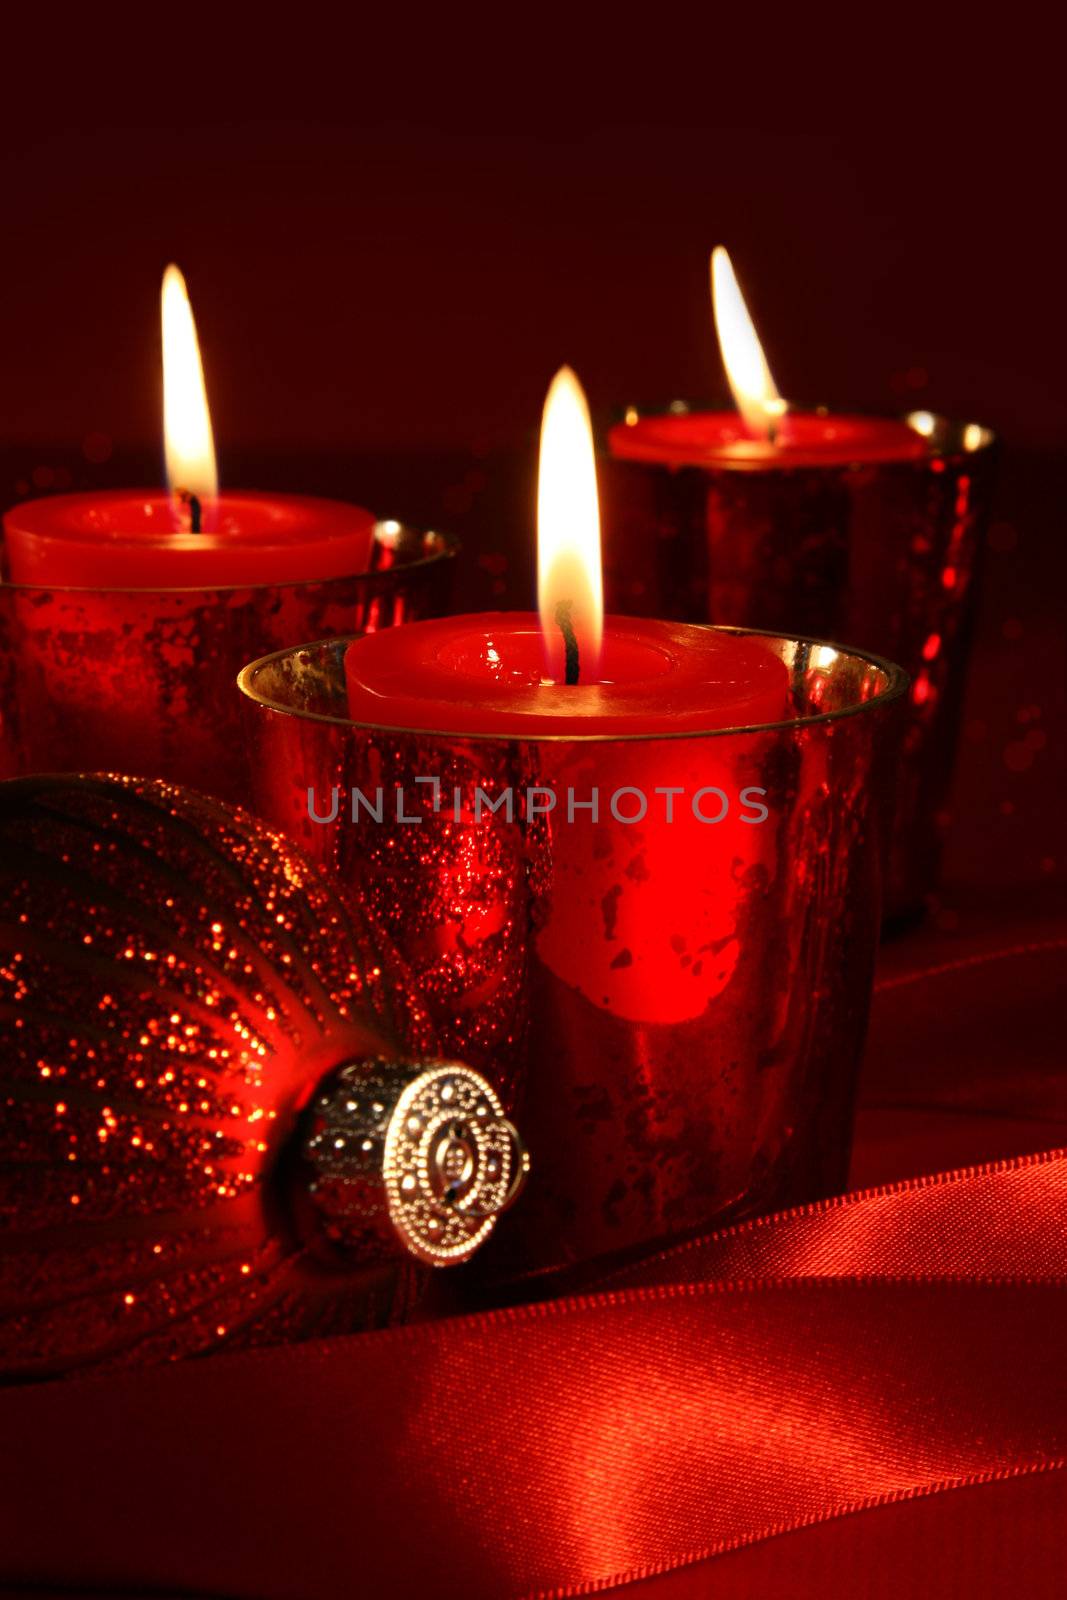 Red candles with ribbons by Sandralise